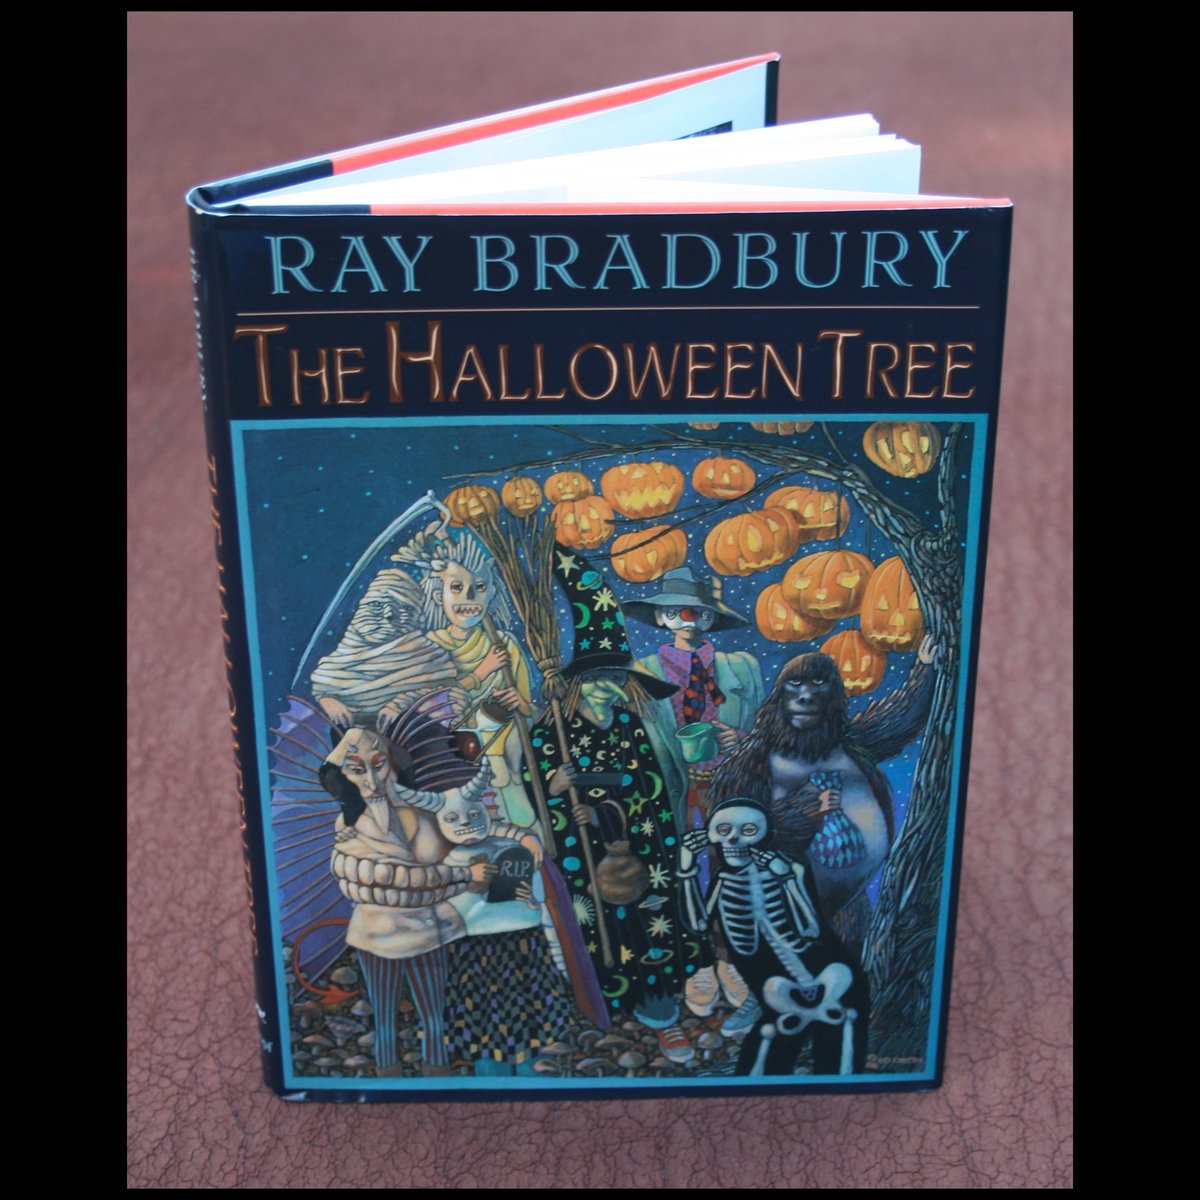 Who’s ready for some more #BradburyAnniversaries? Bradbury released Long After Midnight in August of 1976, S is for Space in August of 1966 and The Halloween Tree in August of 1972 We highly recommend adding these to your fall reading list 😉 #RayBradbury #BookAnniversaries